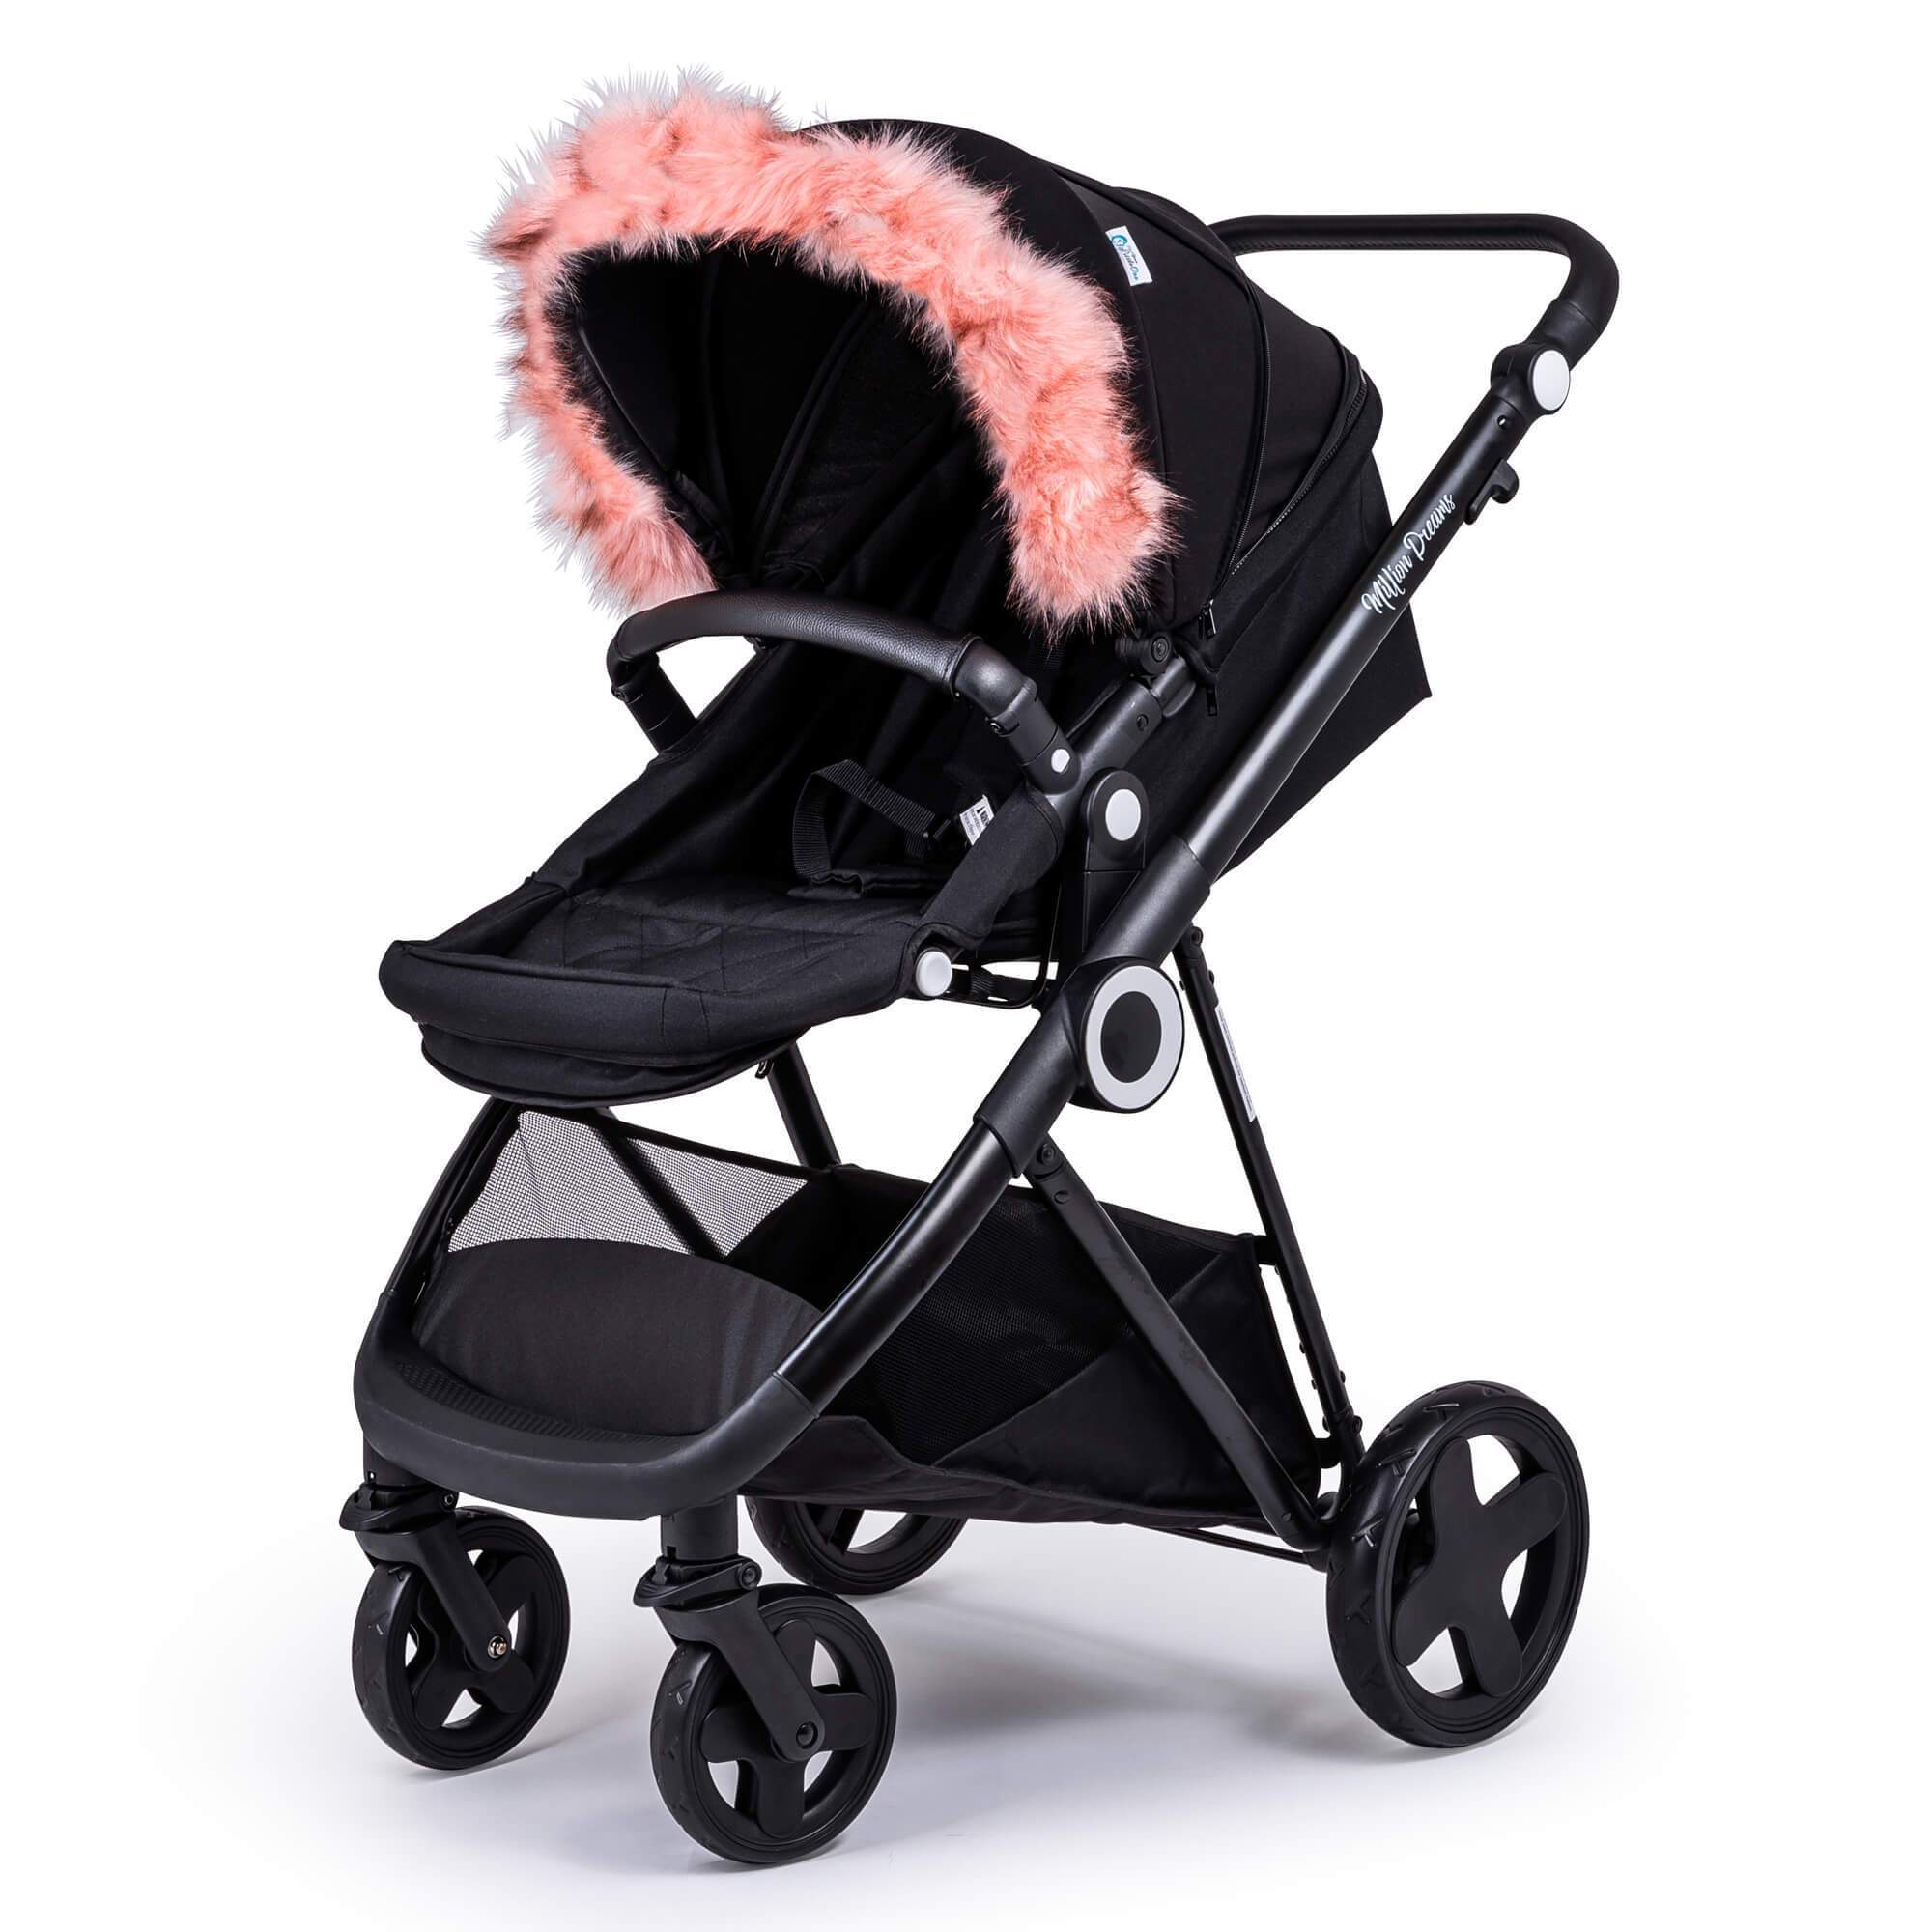 Pram Fur Hood Trim Attachment for Pushchair Compatible with Red Kite - Pink / Fits All Models | For Your Little One